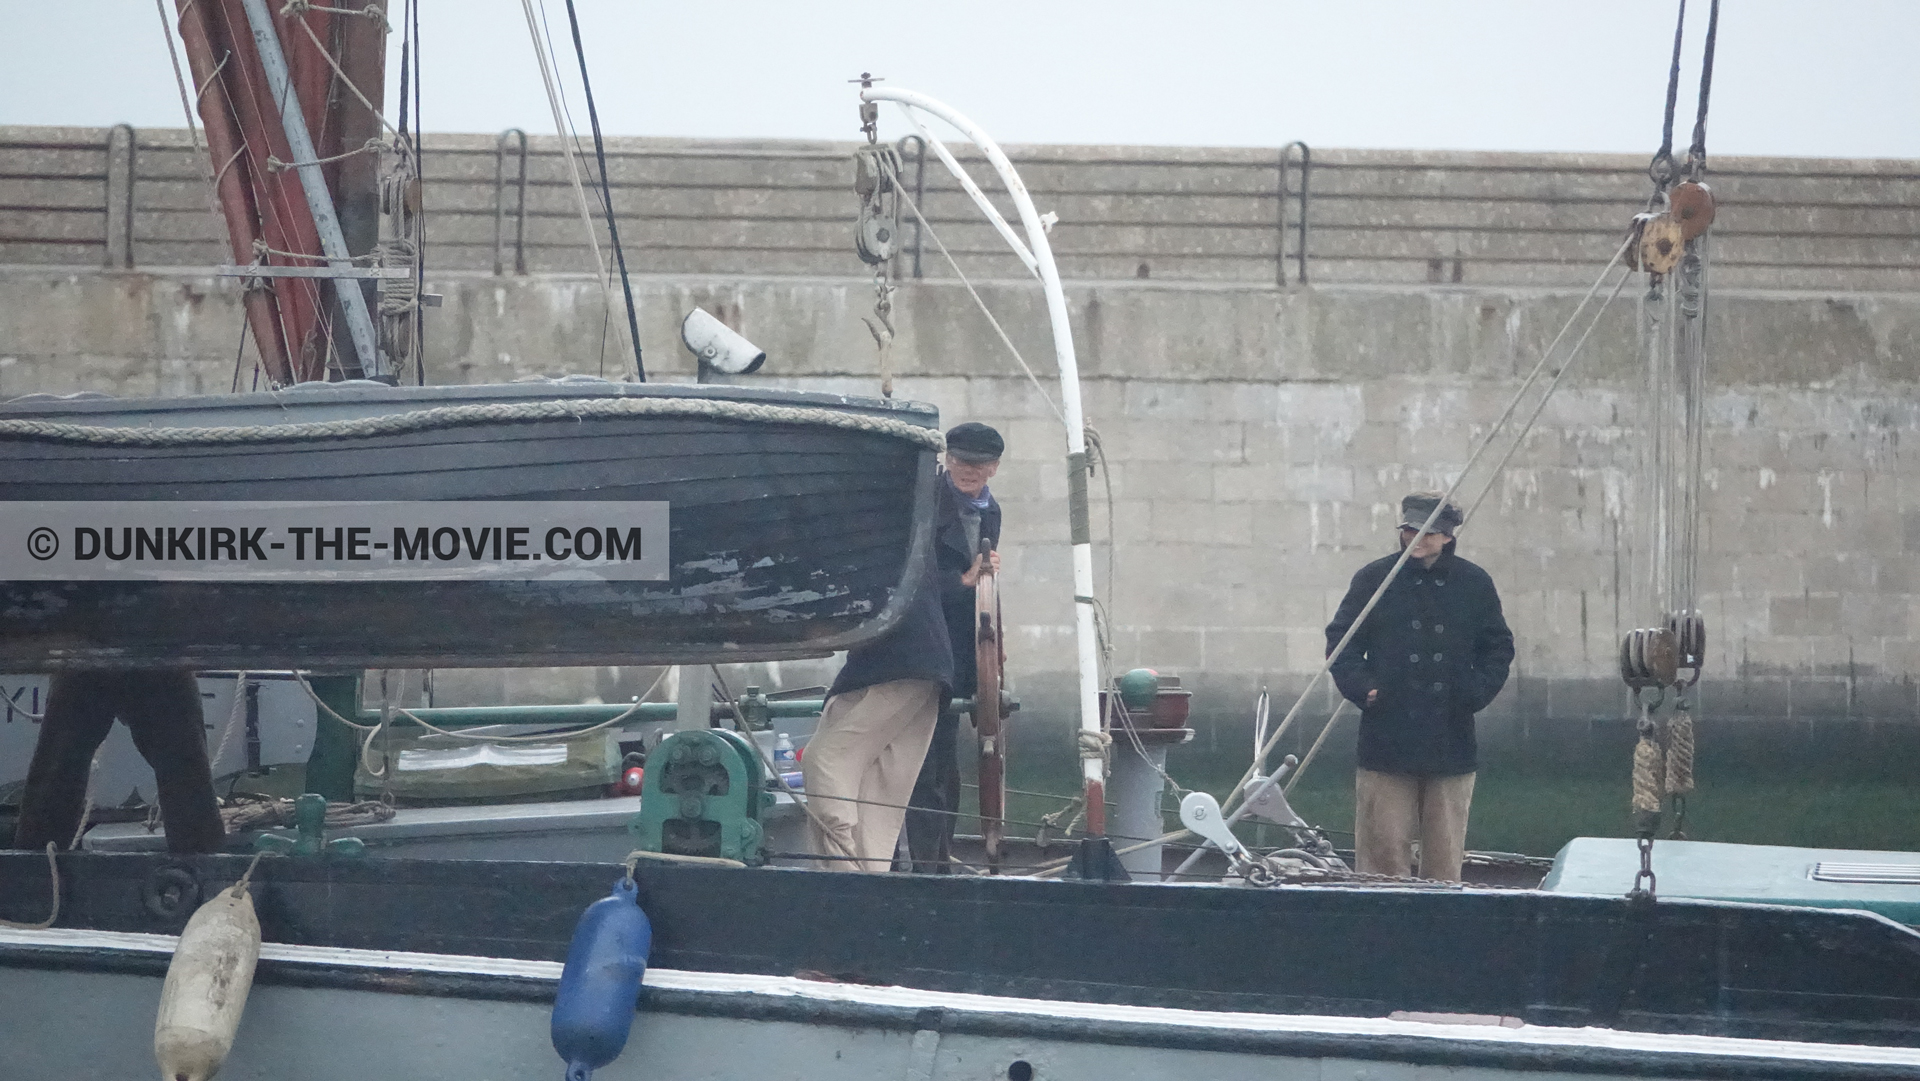 Picture with boat, supernumeraries, EST pier,  from behind the scene of the Dunkirk movie by Nolan